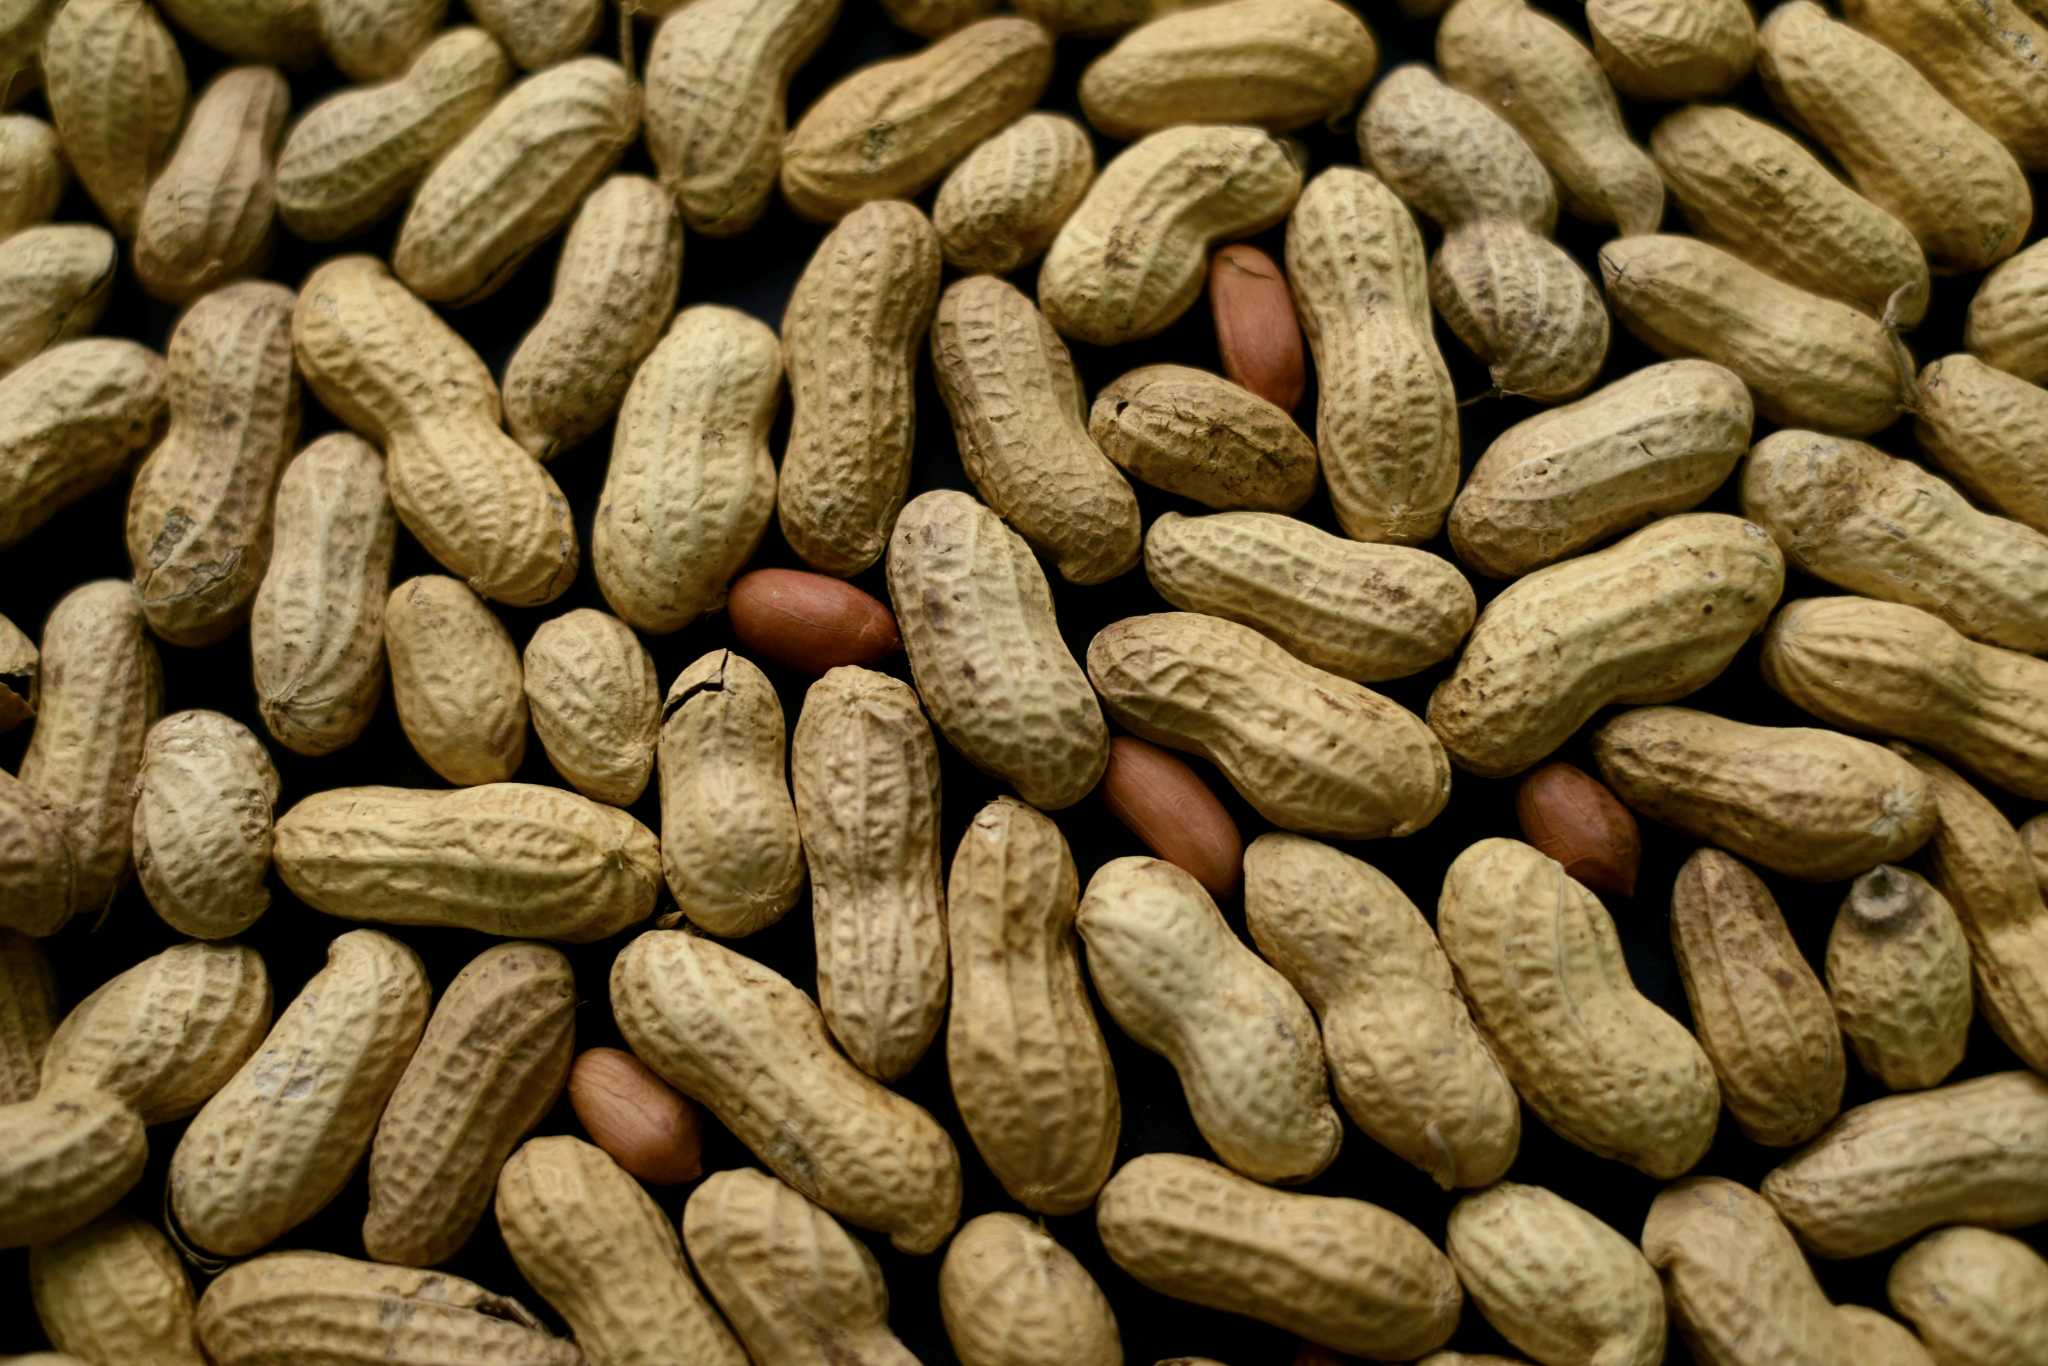 Pepsi and peanuts: A southern tradition